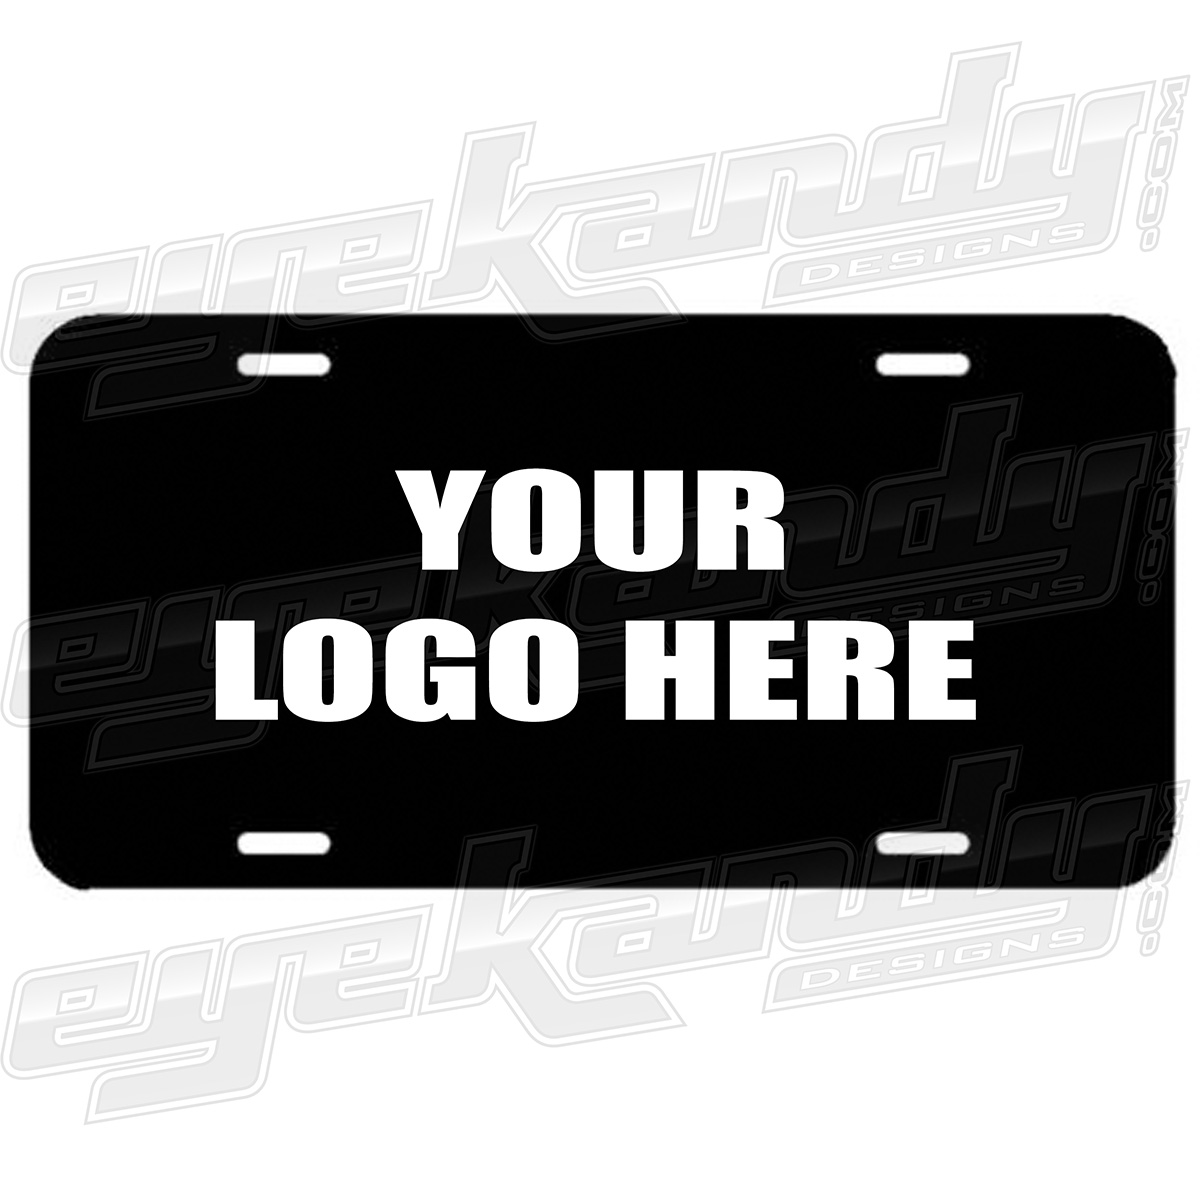 CH-Stainless Steel License Plate Gloss Black